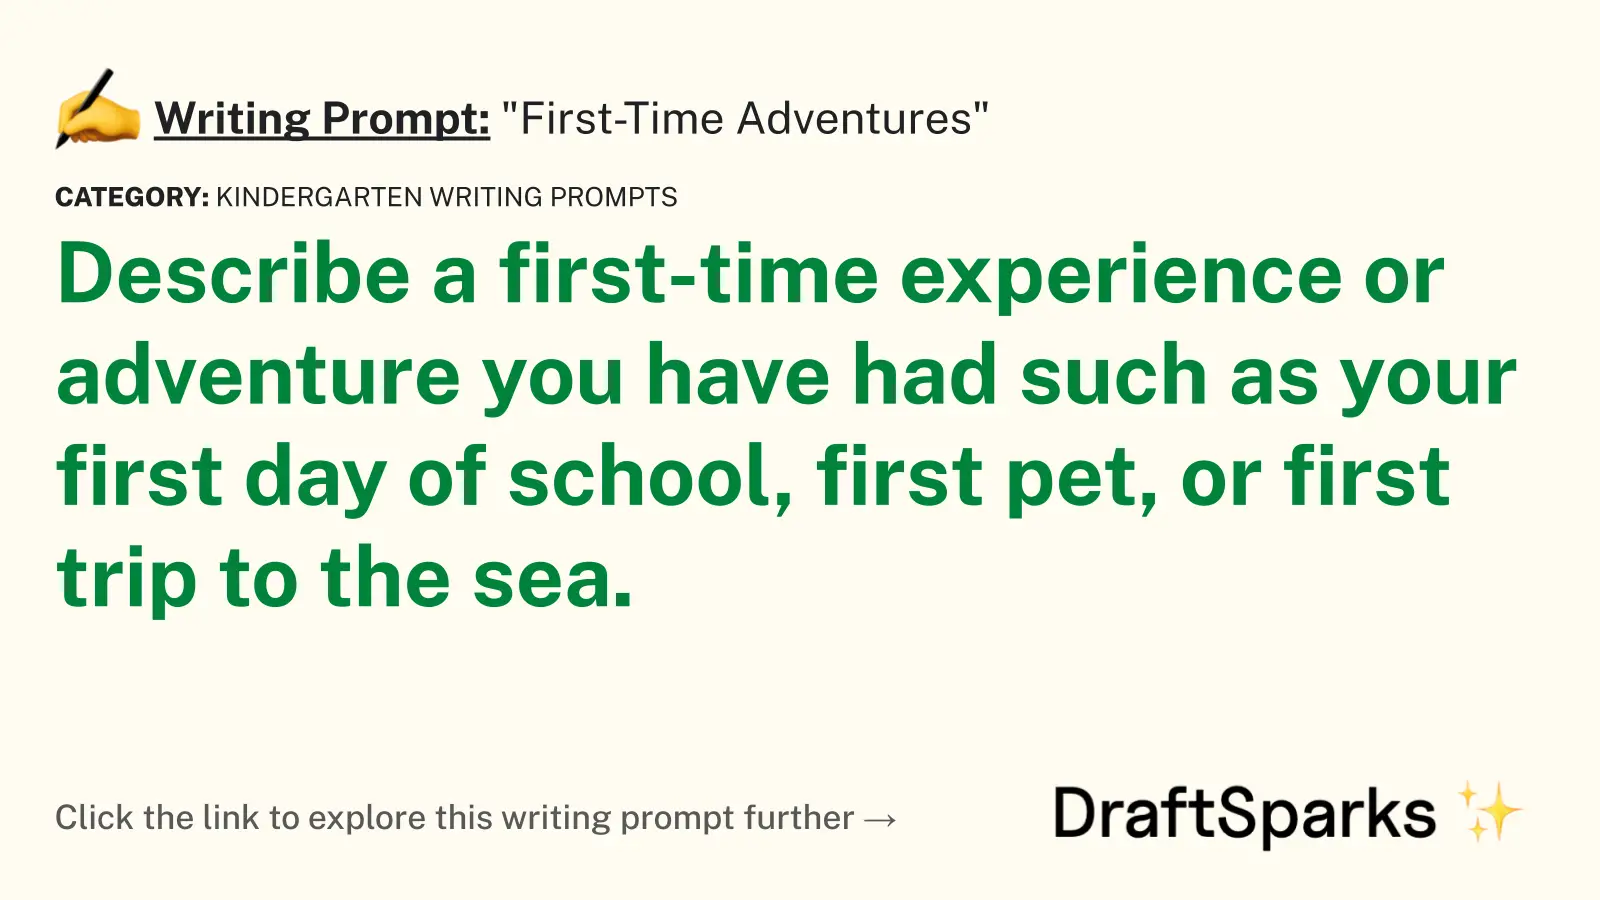 “First-Time Adventures”